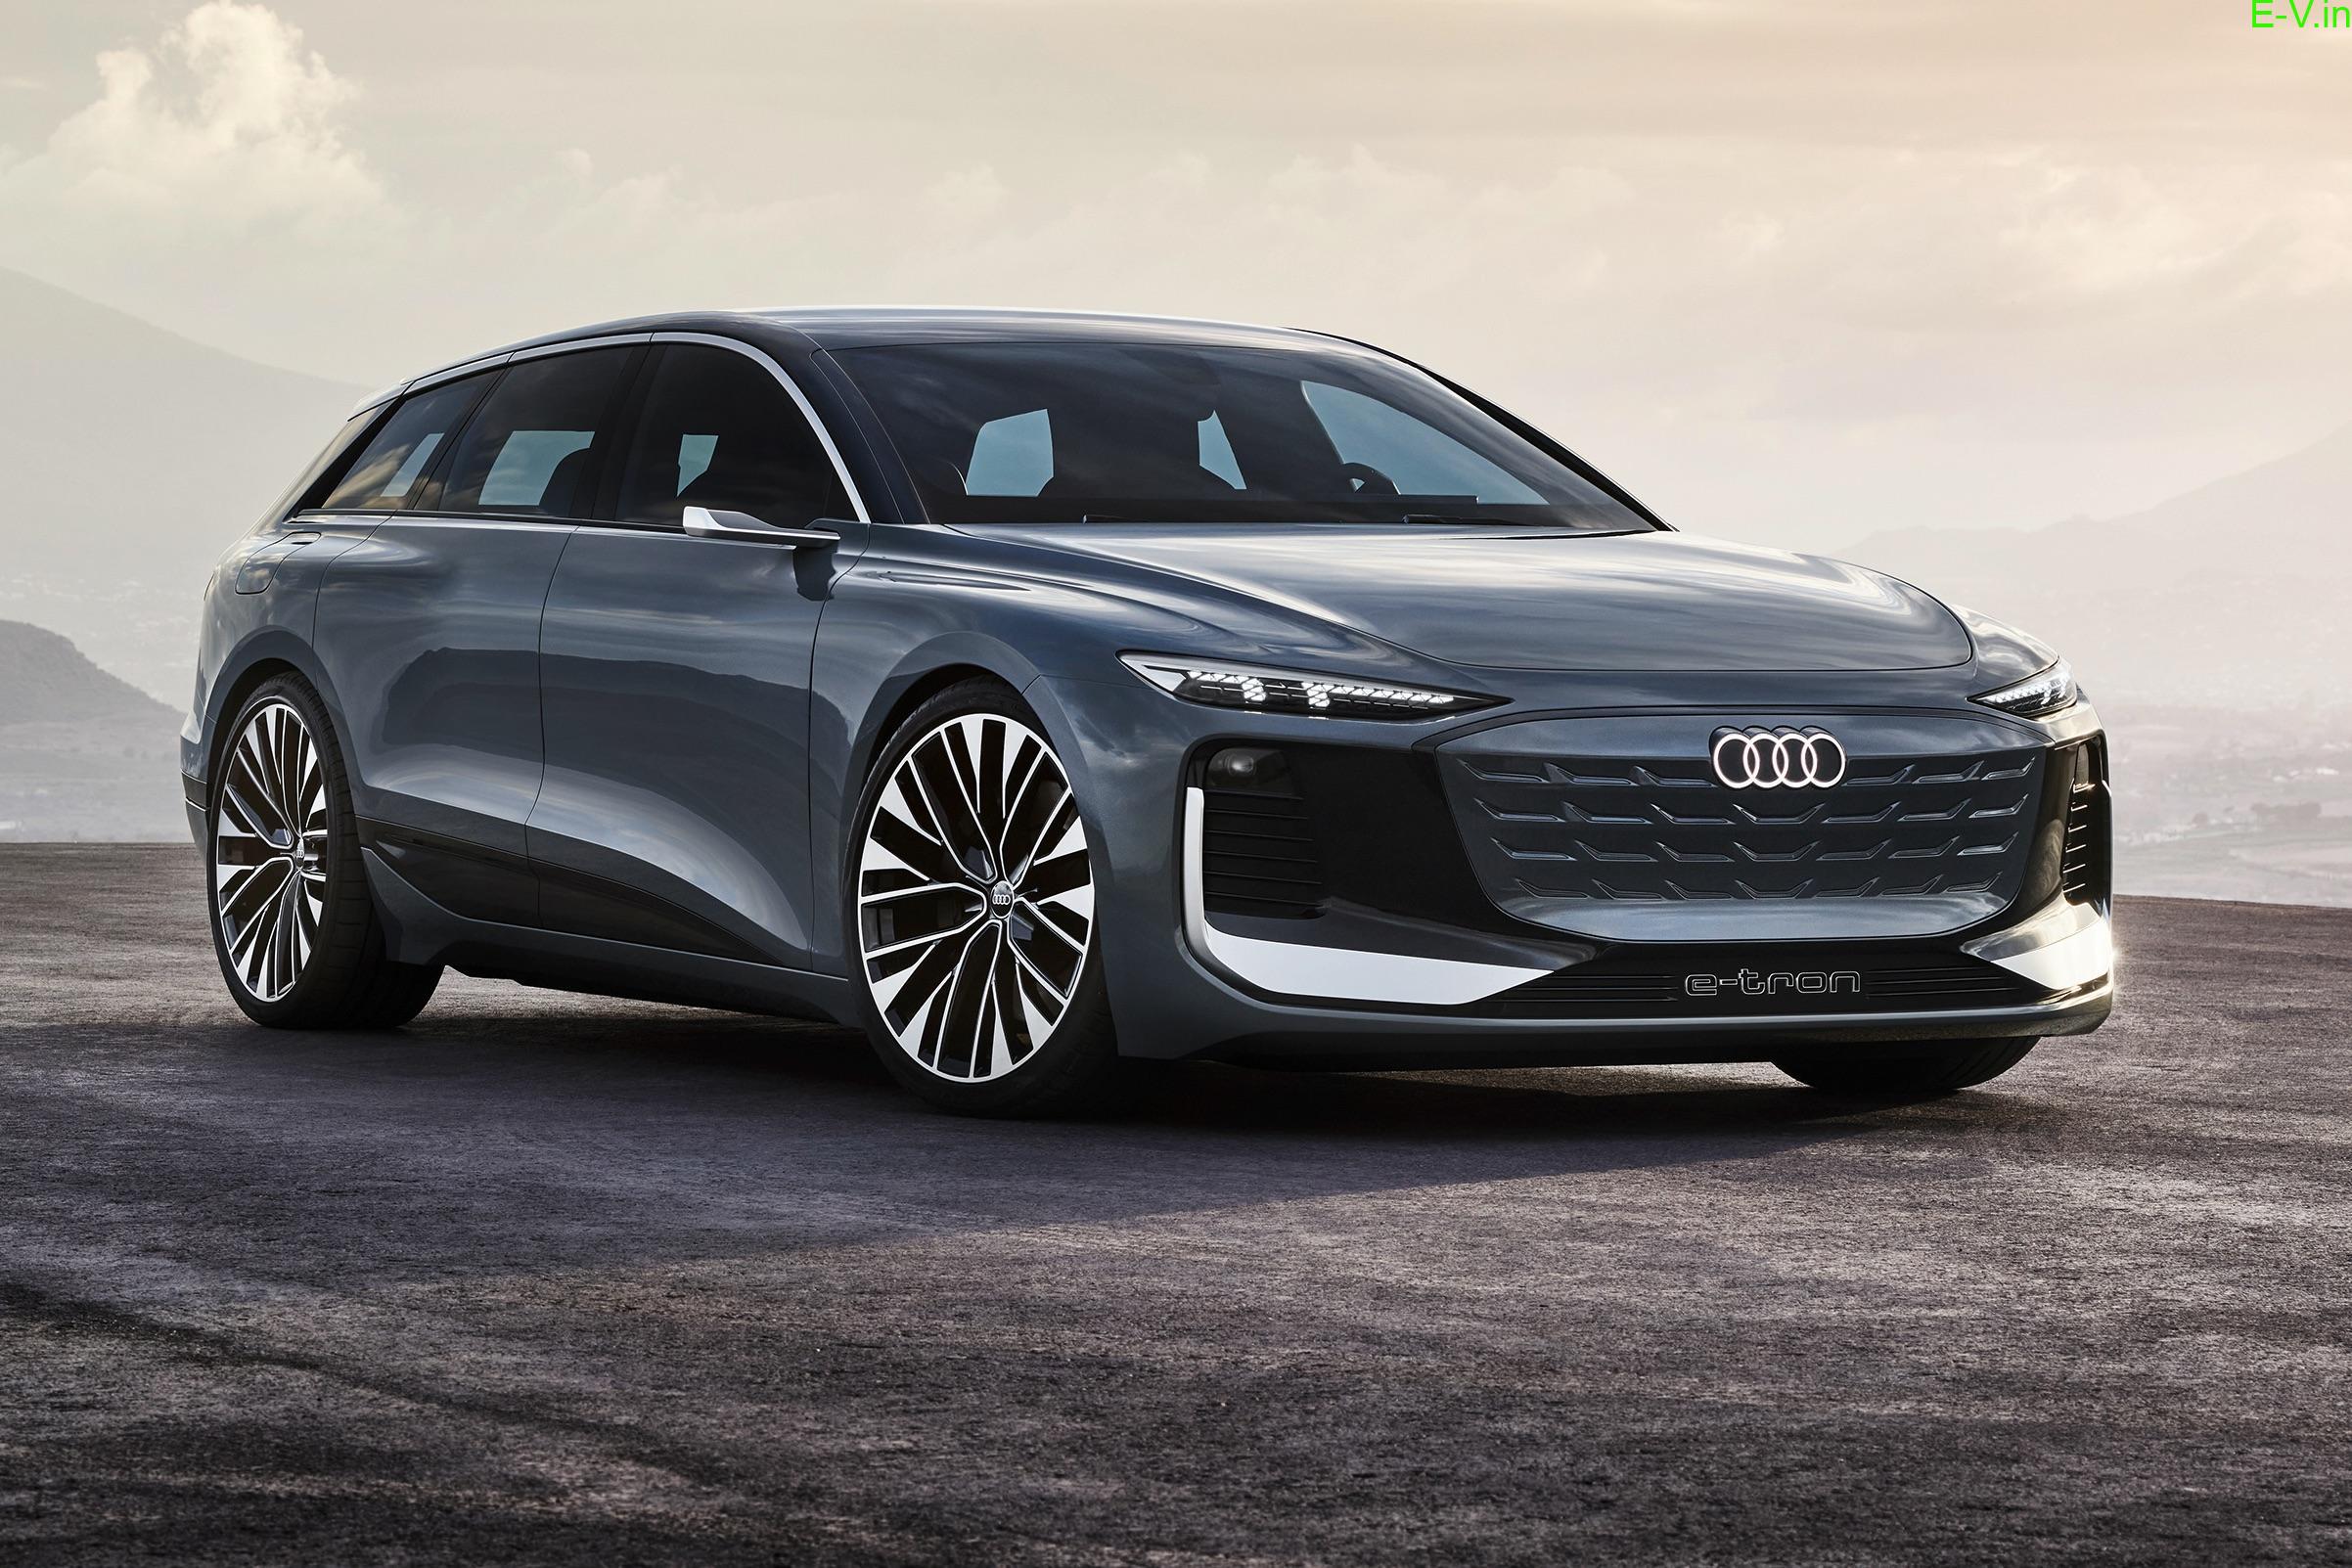 The Audi electric car structure is clear with even numbers